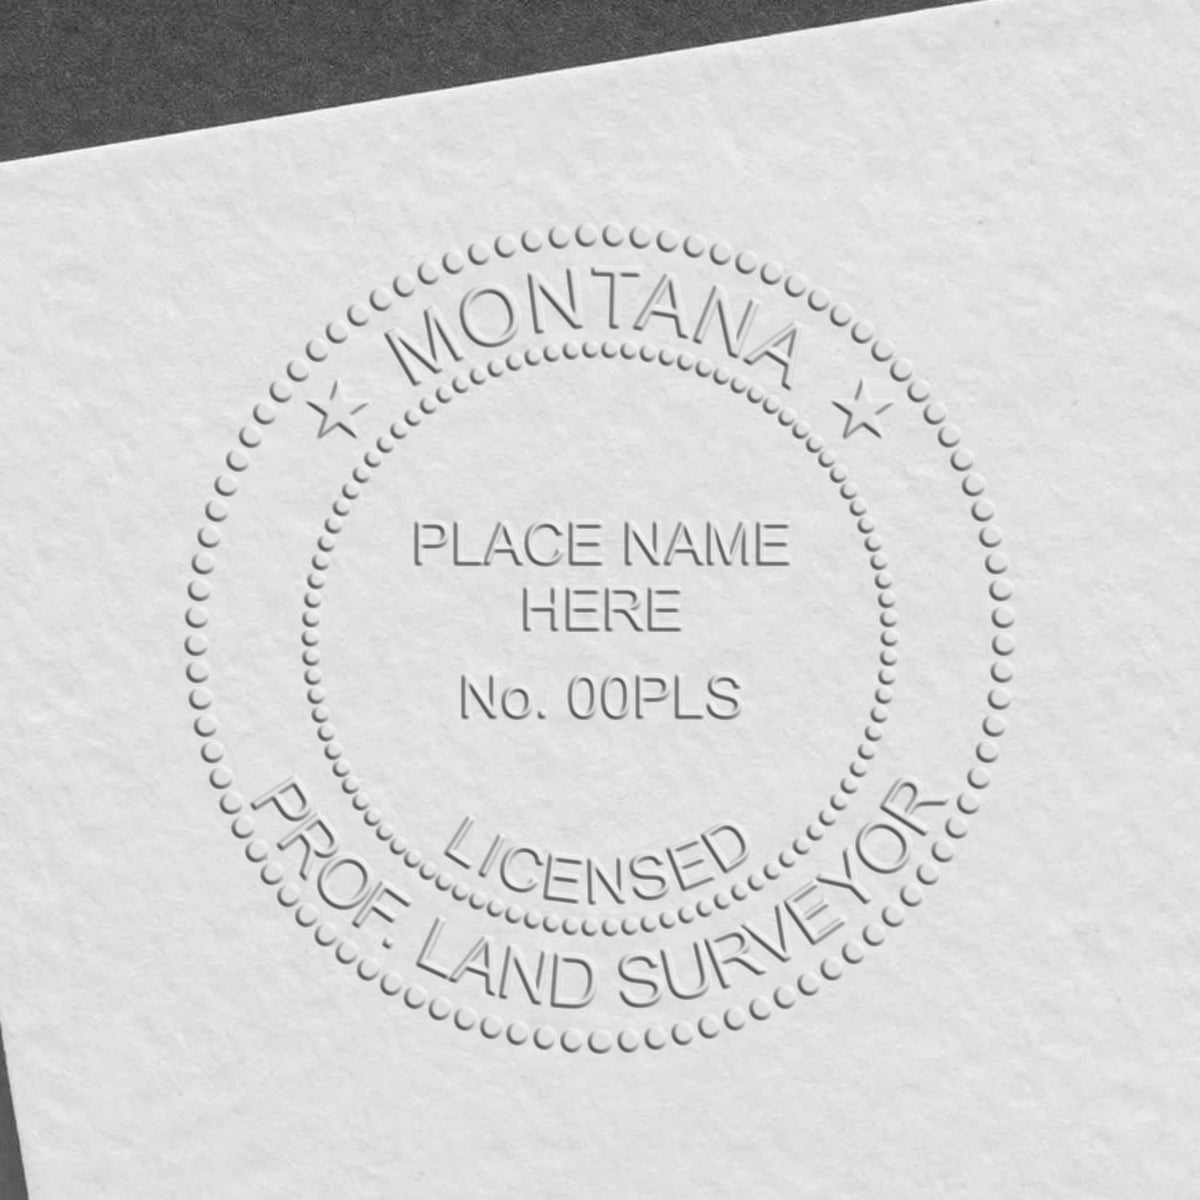 The Long Reach Montana Land Surveyor Seal stamp impression comes to life with a crisp, detailed photo on paper - showcasing true professional quality.